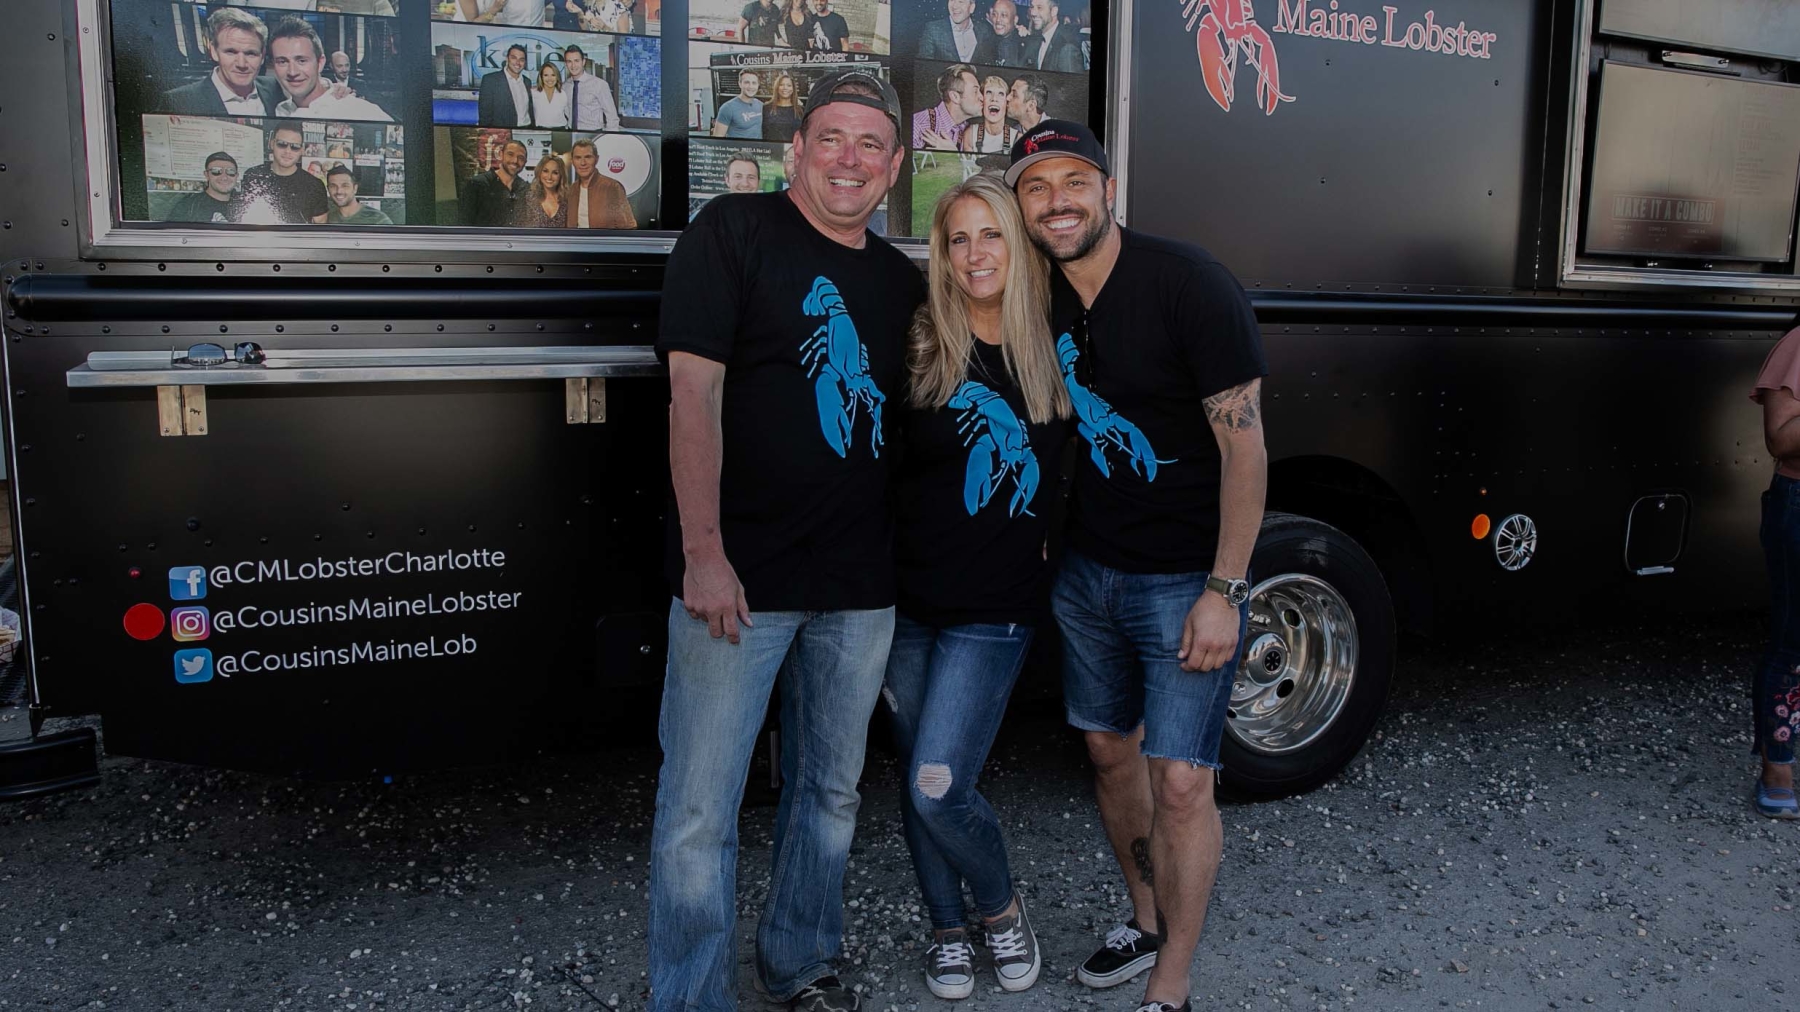 A photo of Cousins Maine Lobster founder, Sabin, with Charlotte franchise owners.